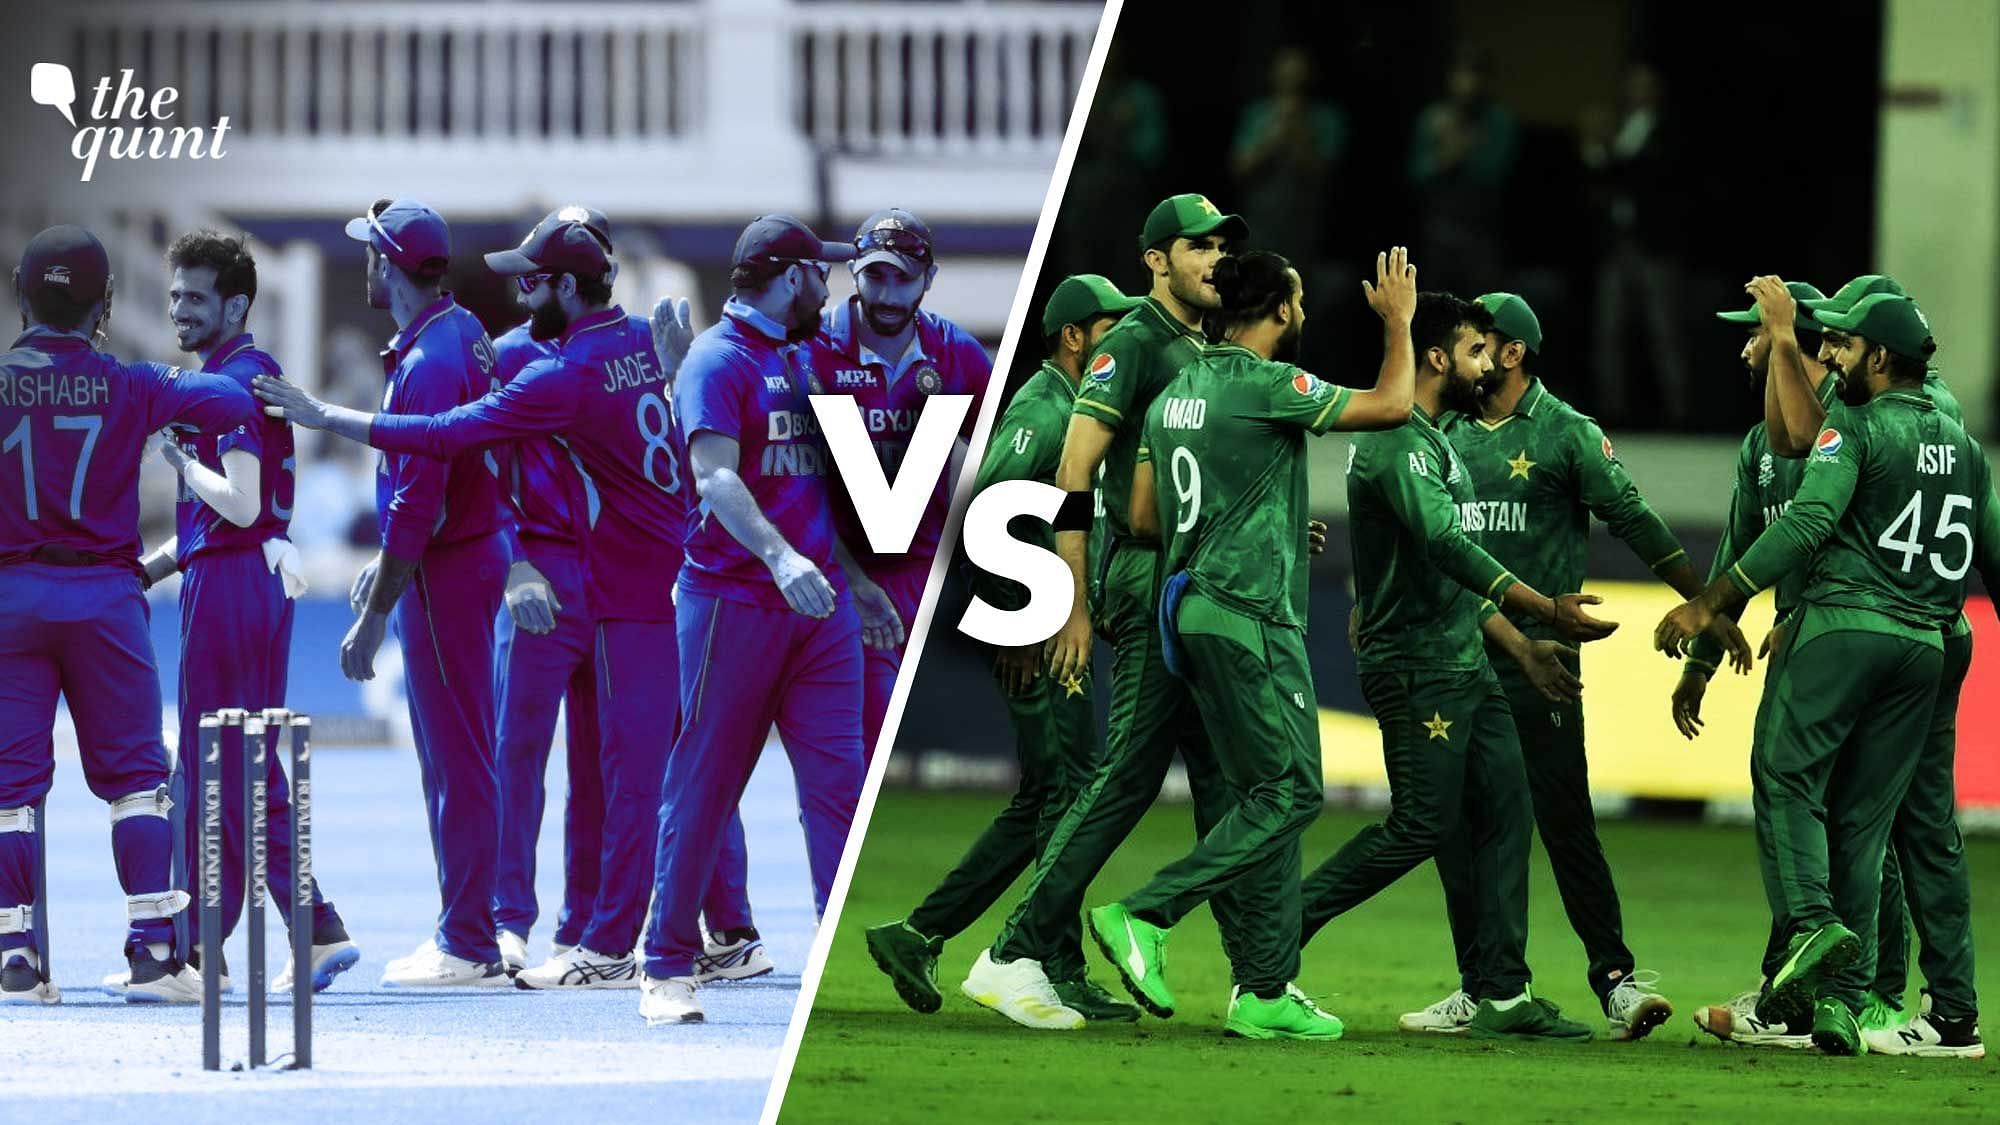 Asia Cup 2022 IND vs PAK Live Streaming Details When And Where To Watch India vs Pakistan Match 2 Live in India?